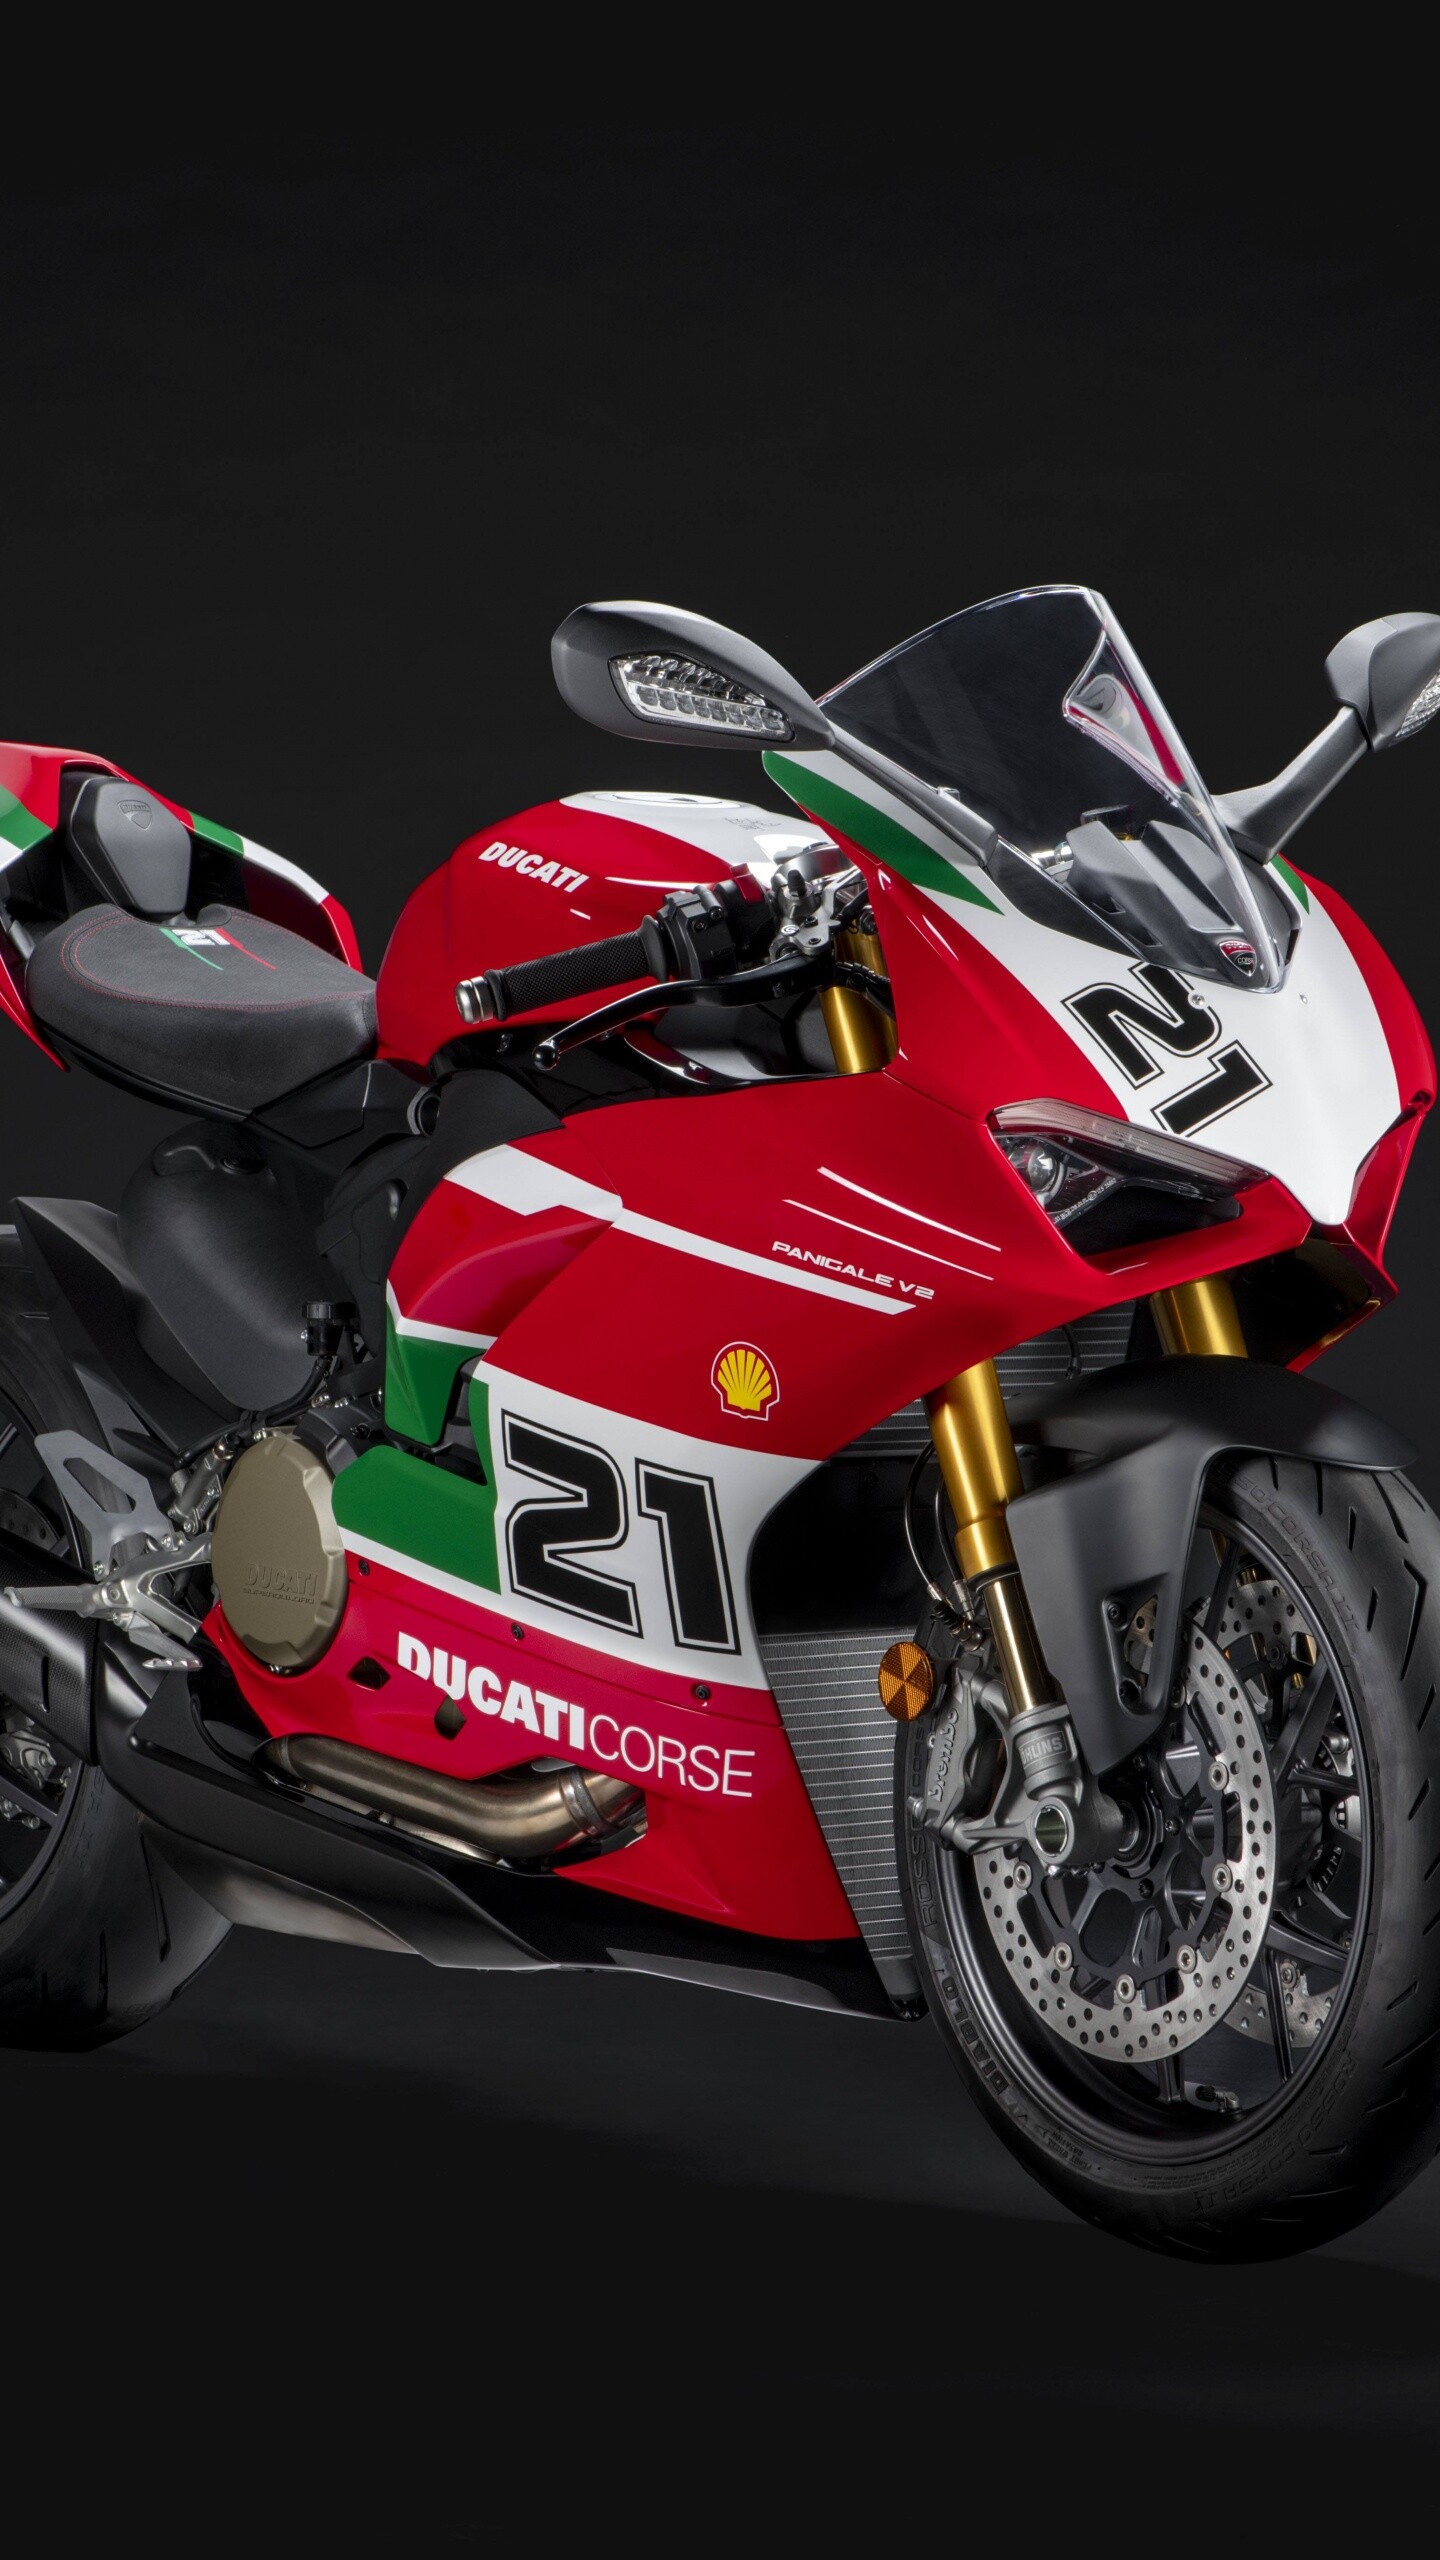 Ducati Panigale V2: Special edition, Bayliss 1st Championship 20th Anniversary, Powered by the 955 cm³ twin cylinder Superquadro engine. 1440x2560 HD Wallpaper.